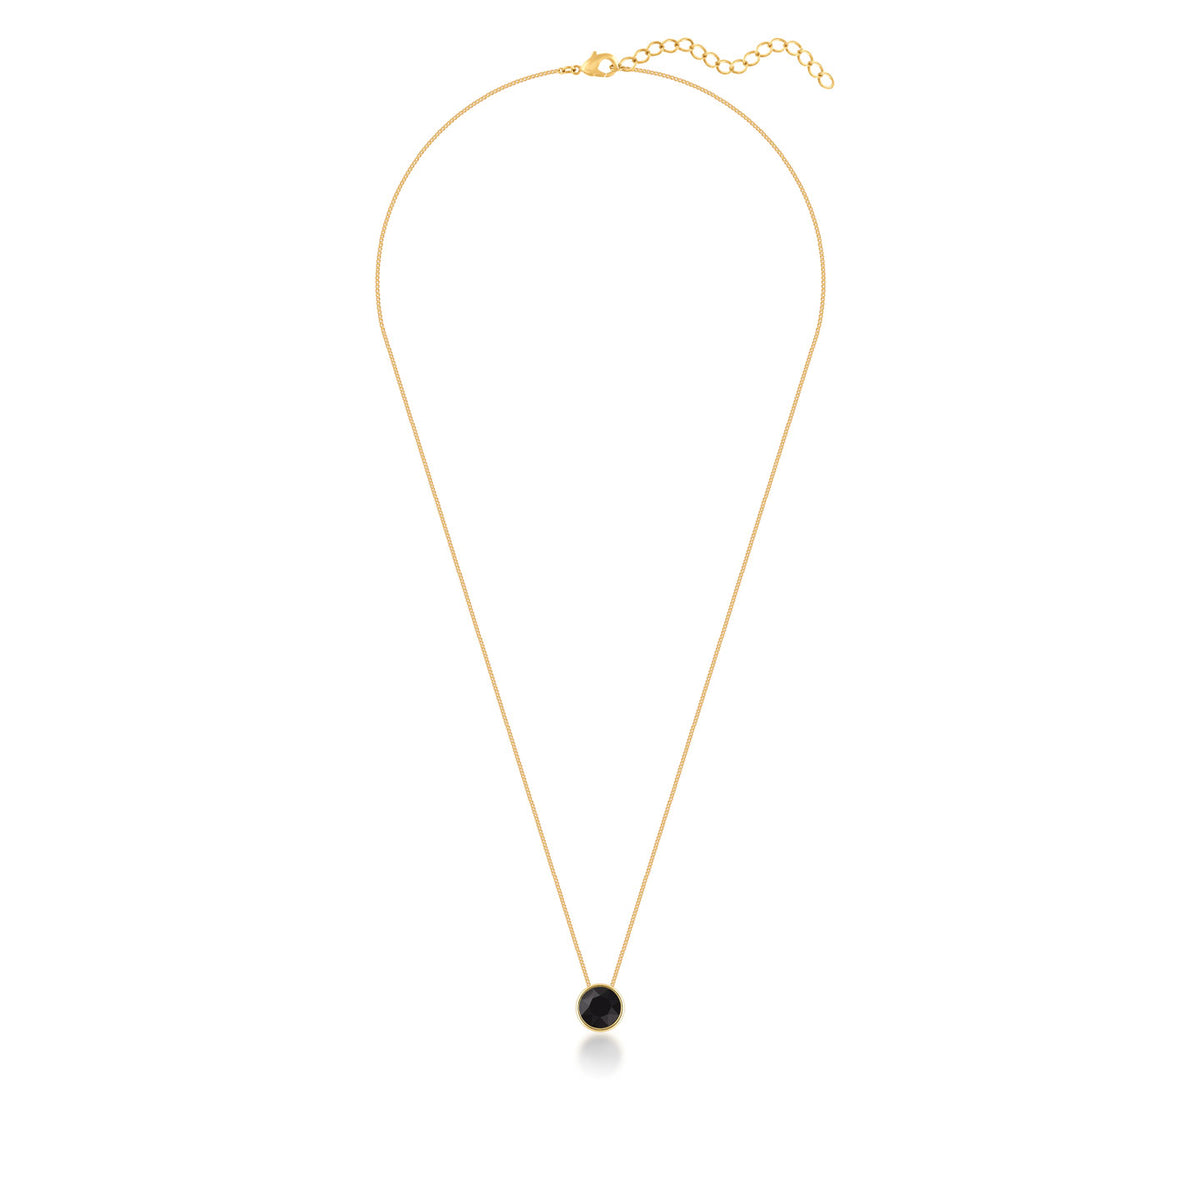 Harley Small Pendant Necklace with Black Jet Round Crystals from Swarovski Gold Plated - Ed Heart